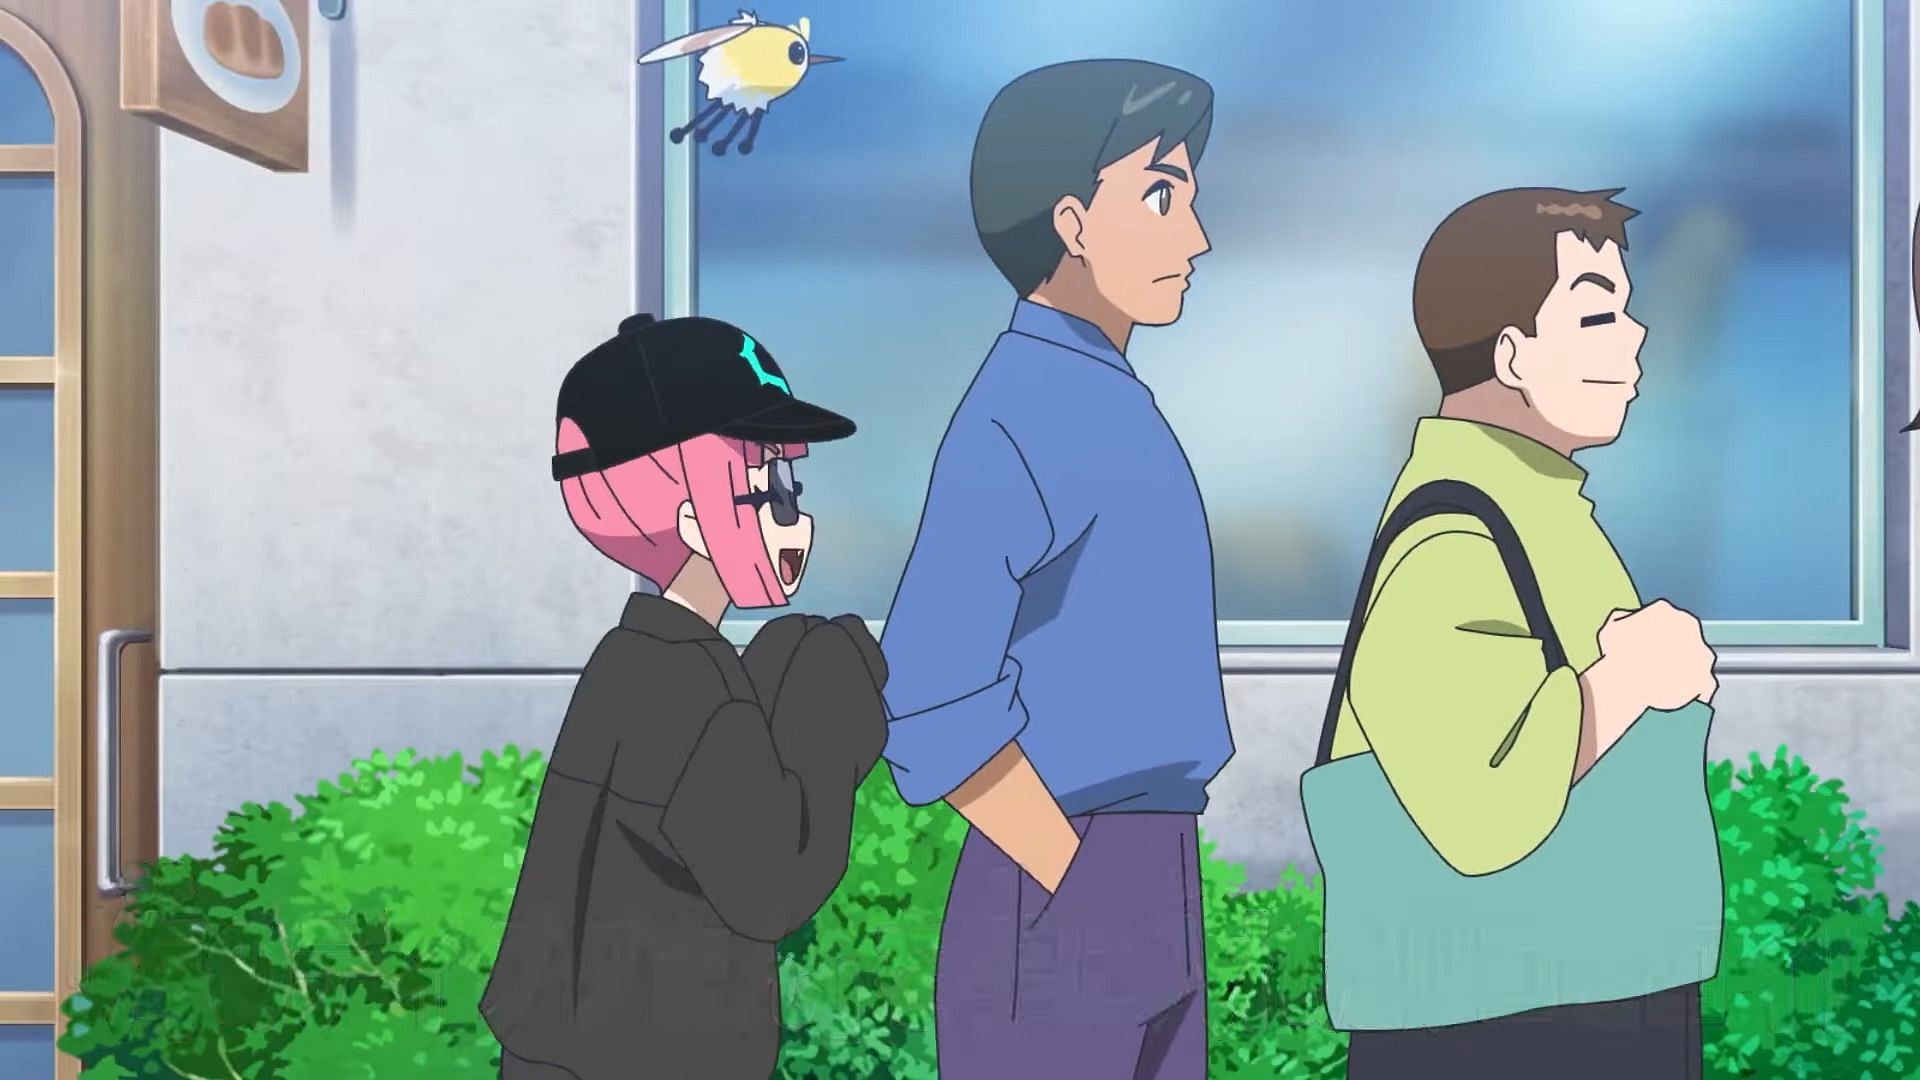 Coral seems to be chasing after sweets in Episode 43 (Image via The Pokemon Company)